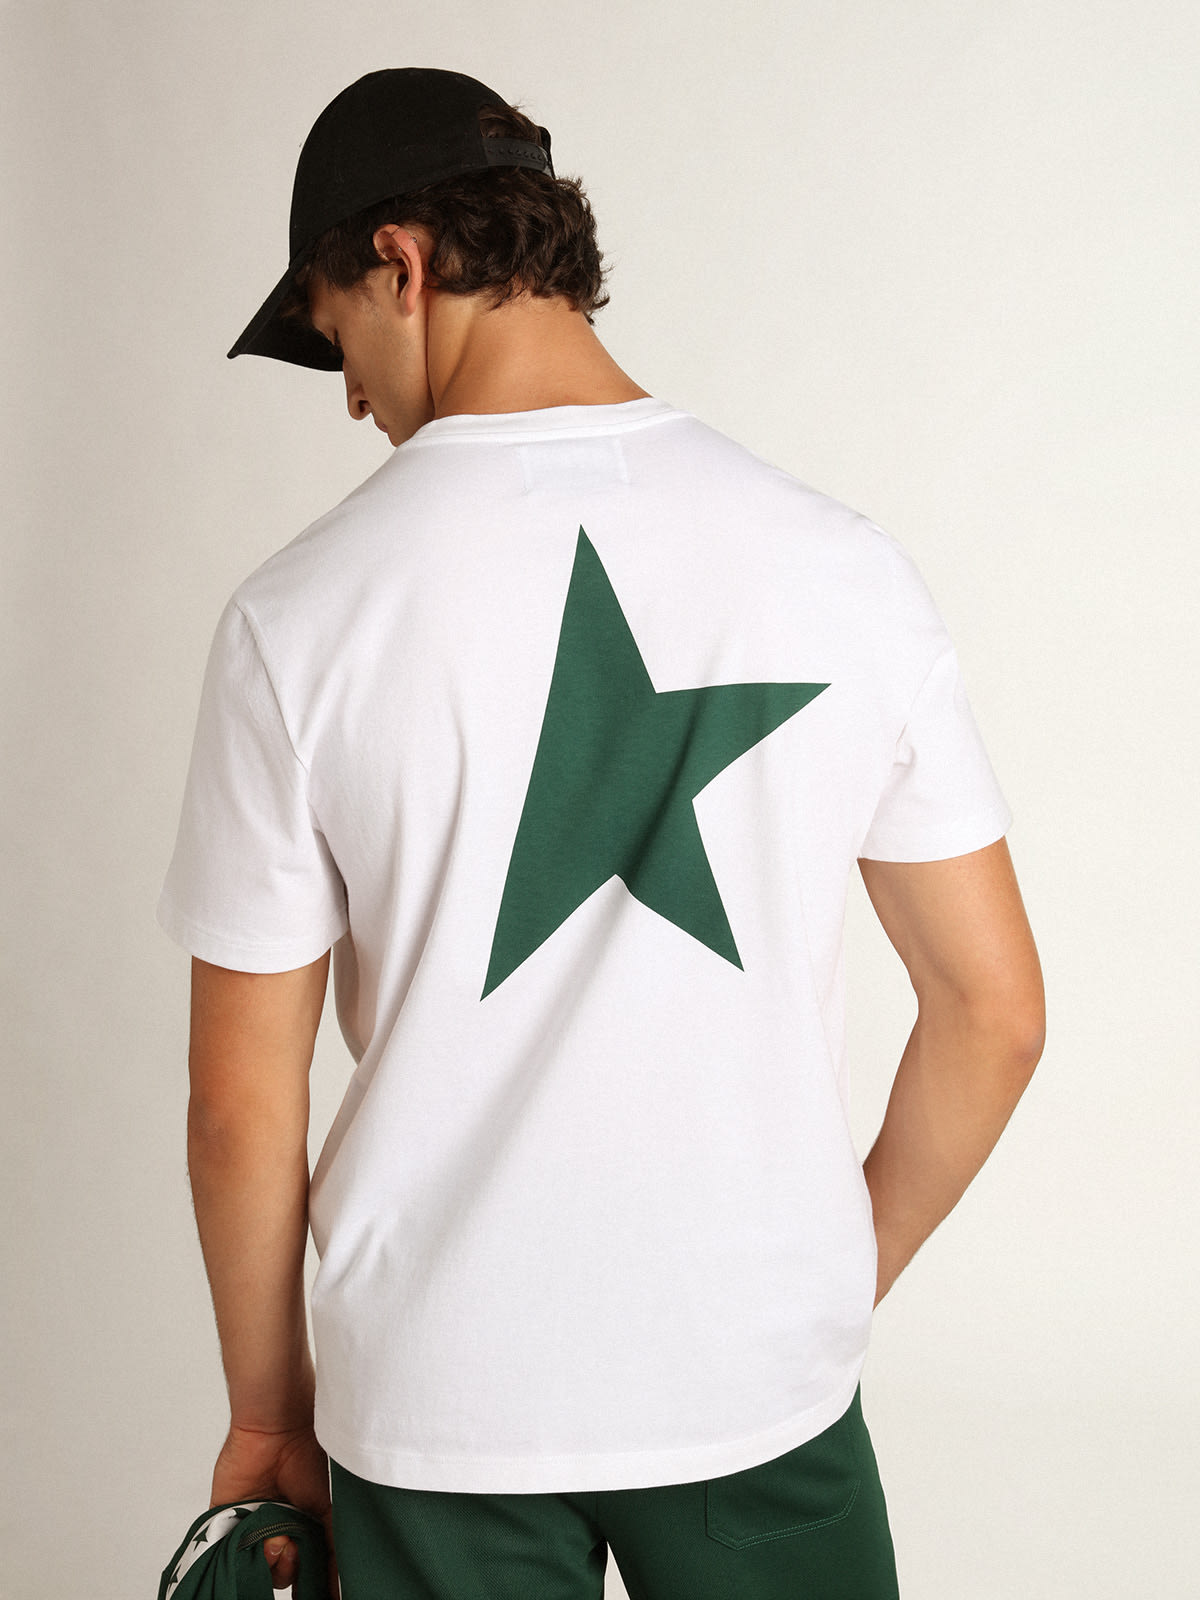 Golden Goose - White Star Collection T-shirt with contrasting green logo and star in 